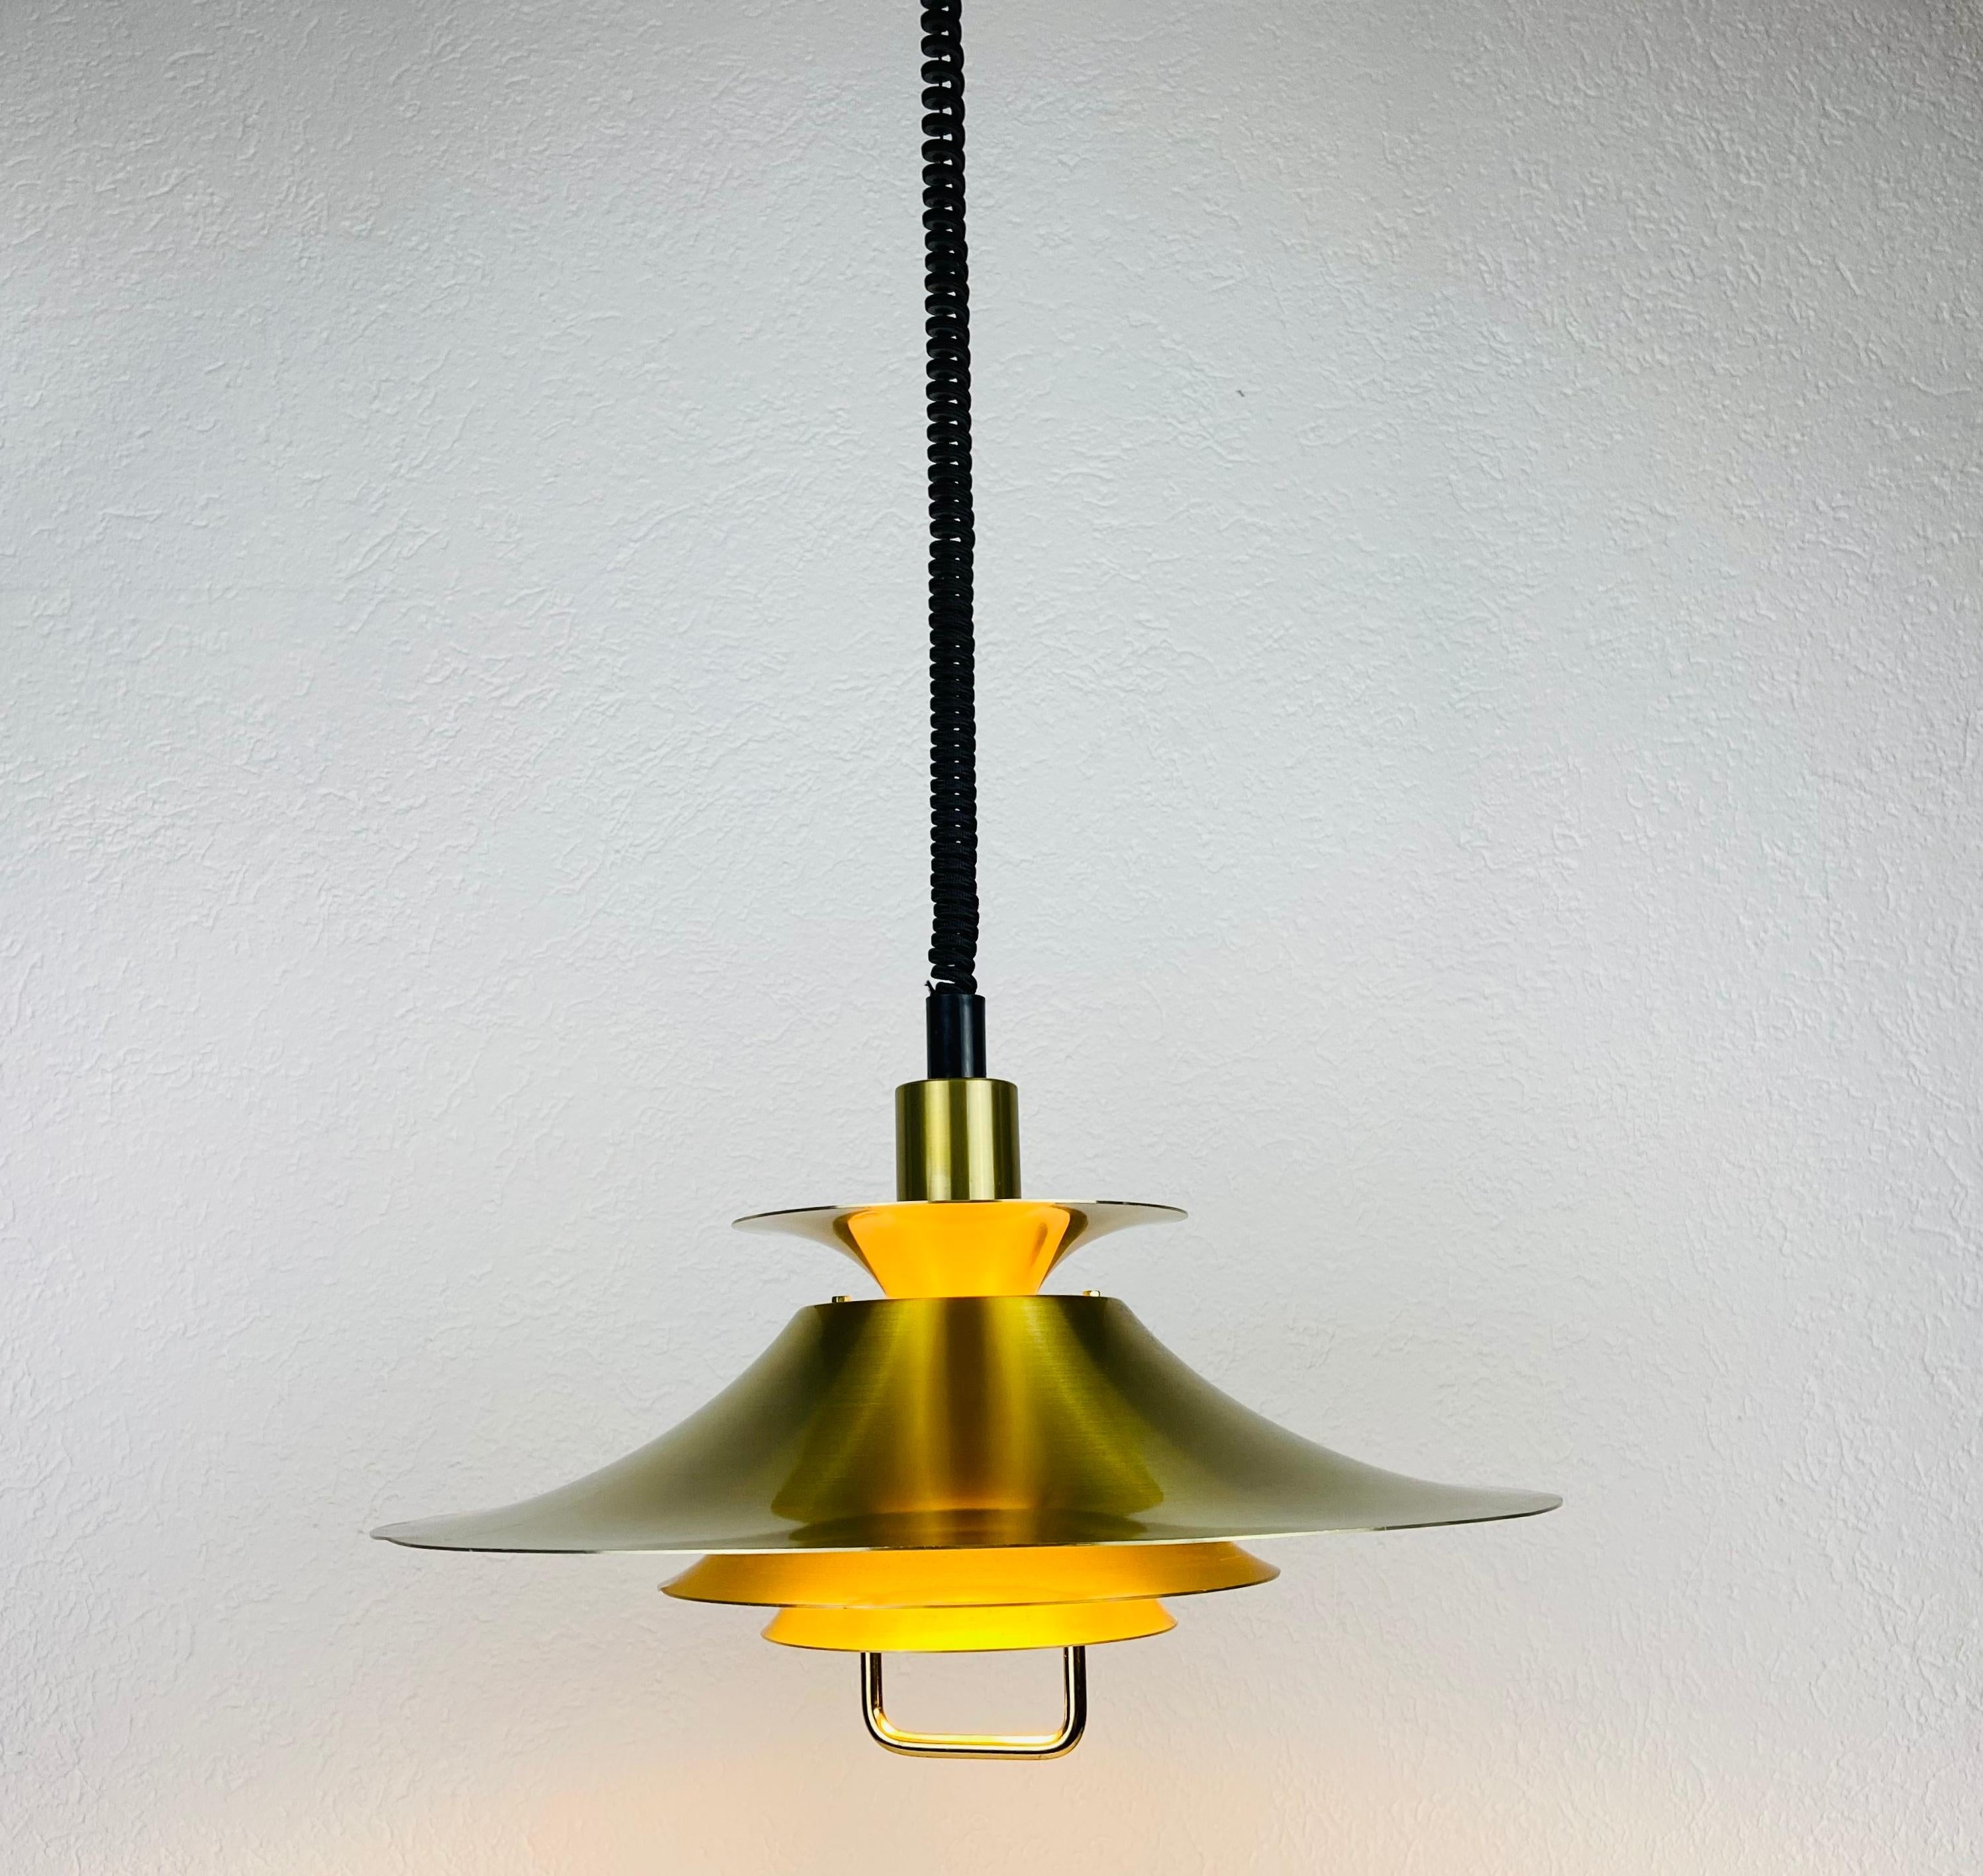 Mid-20th Century Danish Brass and Metal Pendant Lamp, 1960s For Sale